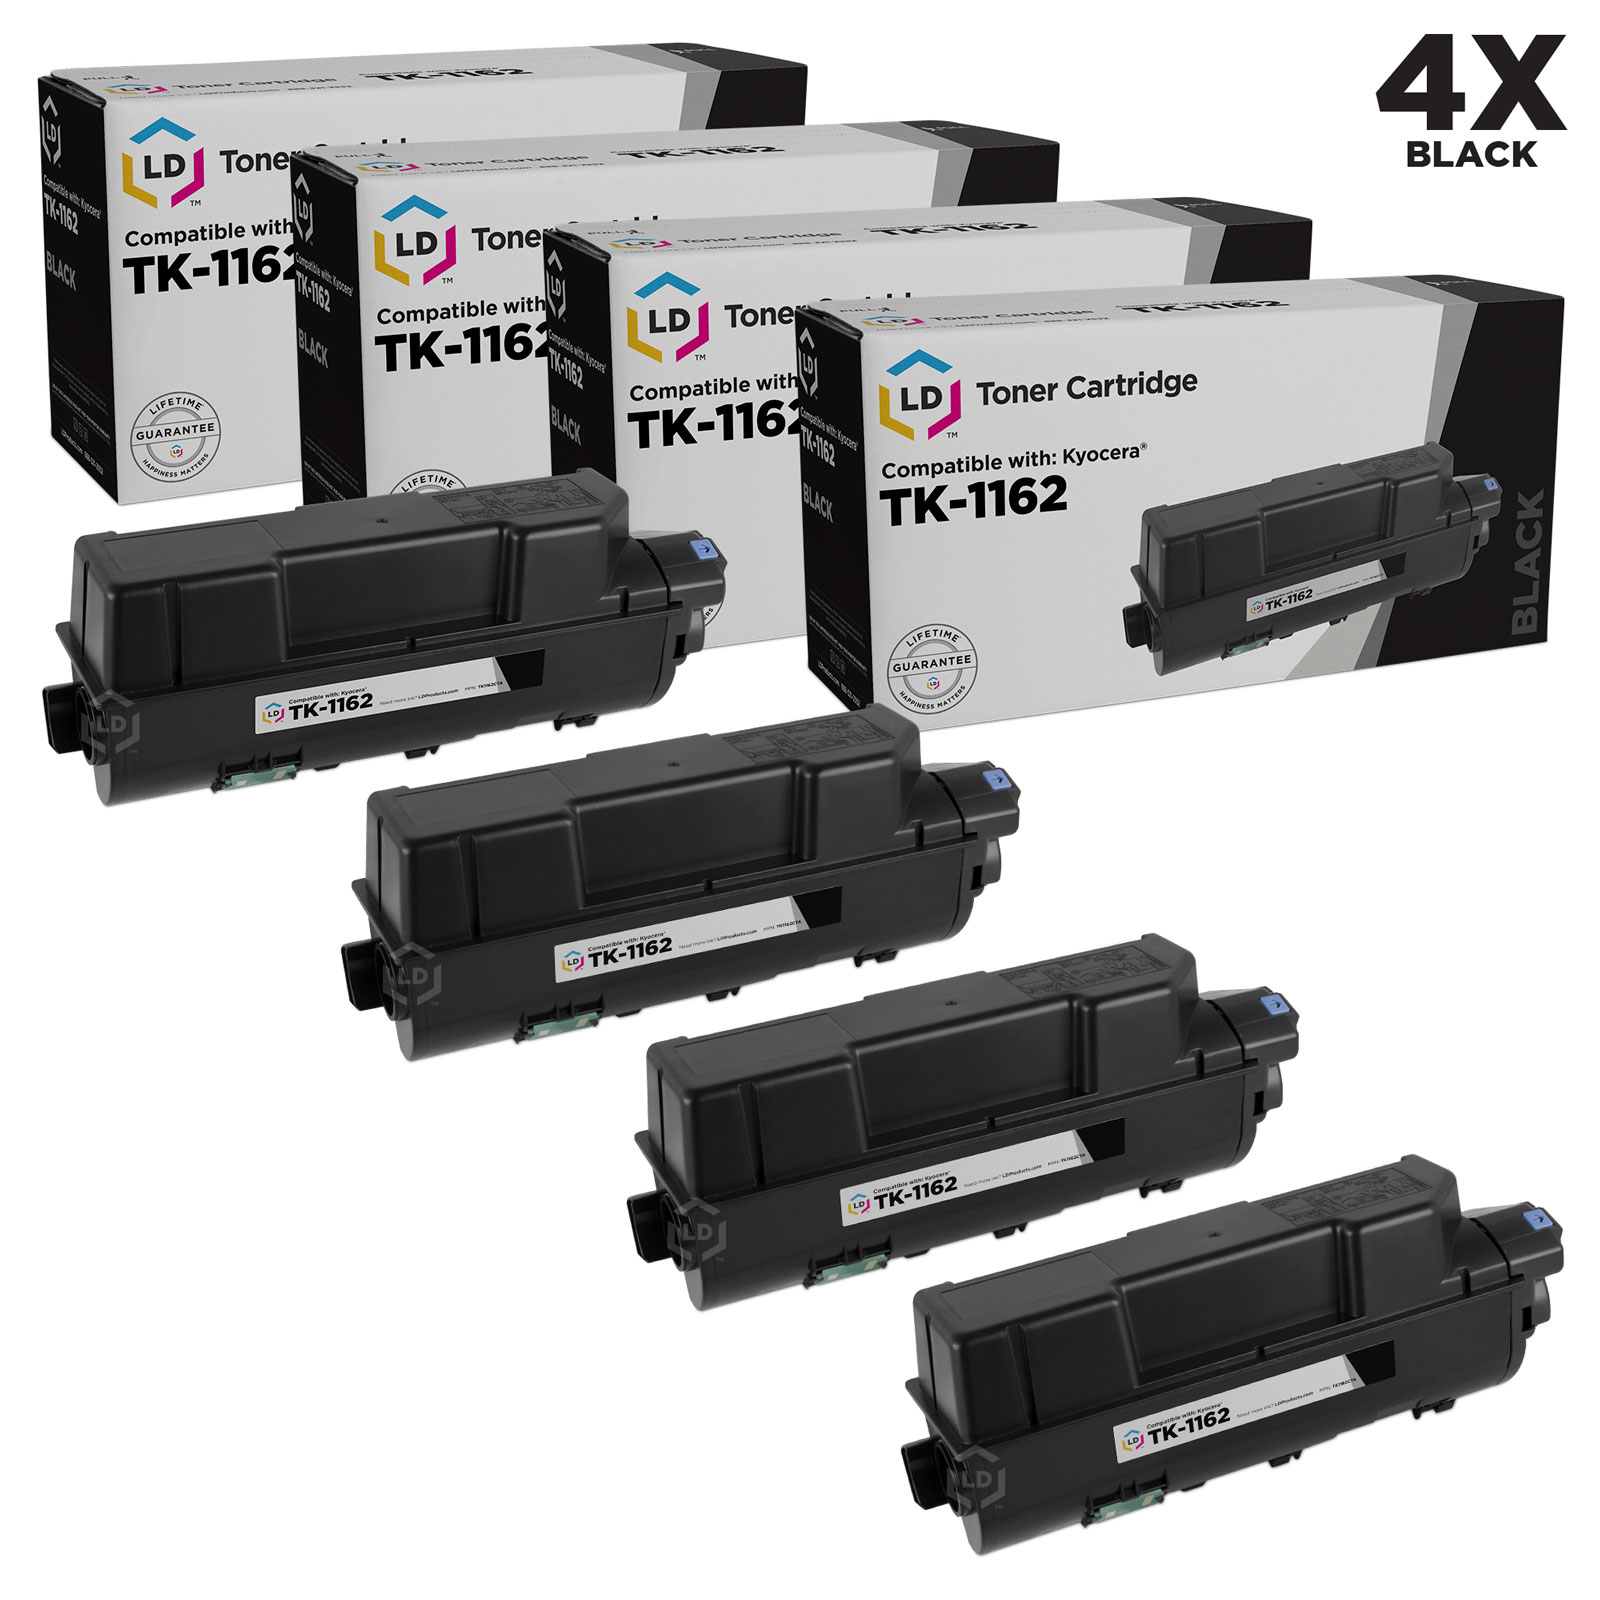 LD Products Compatible Toner Cartridge Replacement for Kyocera 1T02RY0US0 TK-1162 (Black, 4-Pack) - image 1 of 6